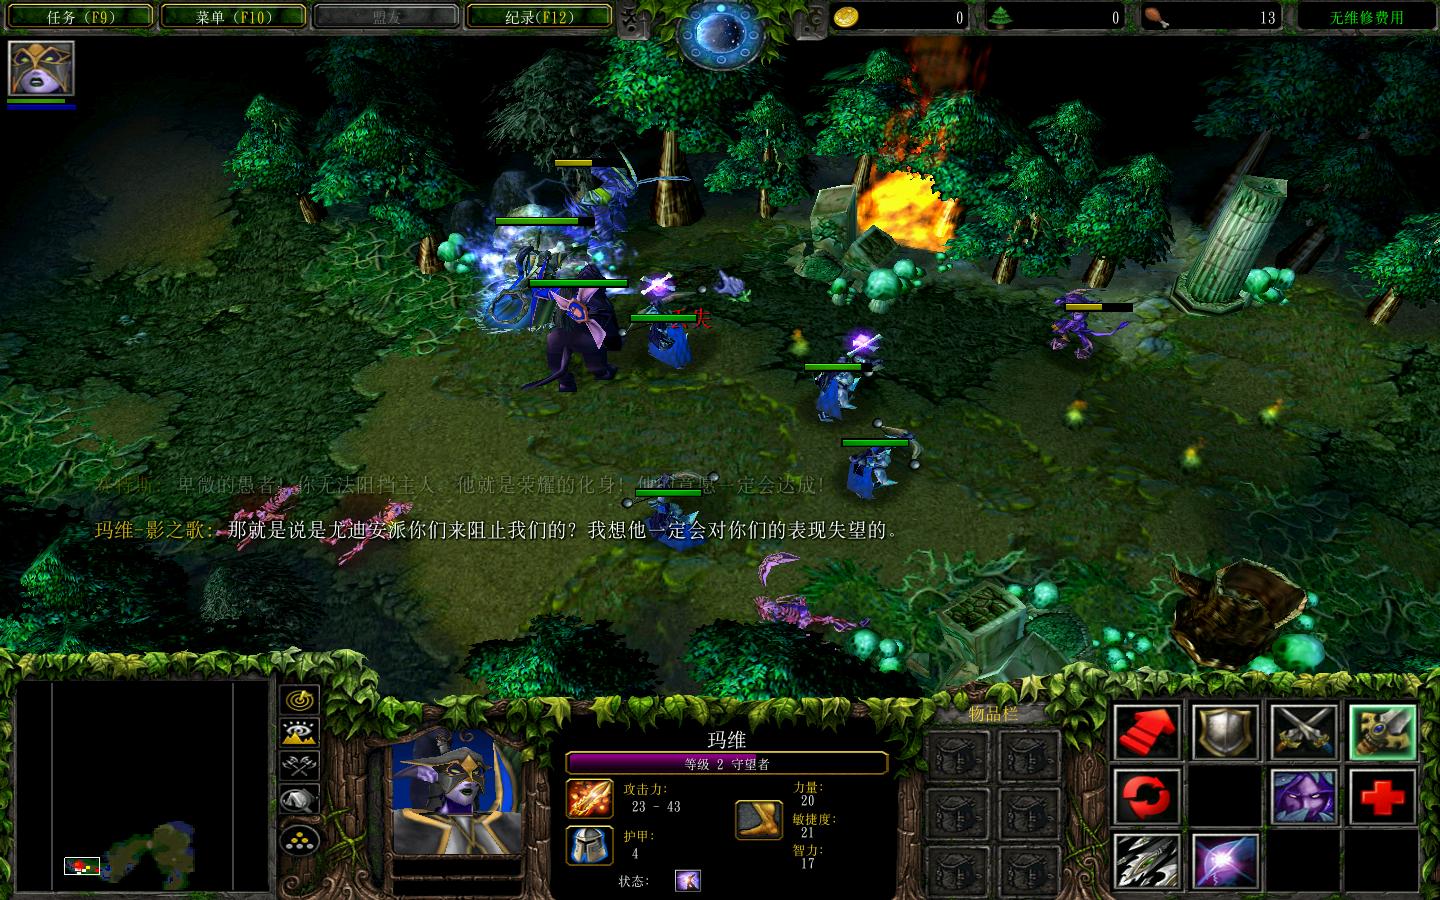 ħ3Warcraft III The Frozen Thronev1.24޾v1.0.20